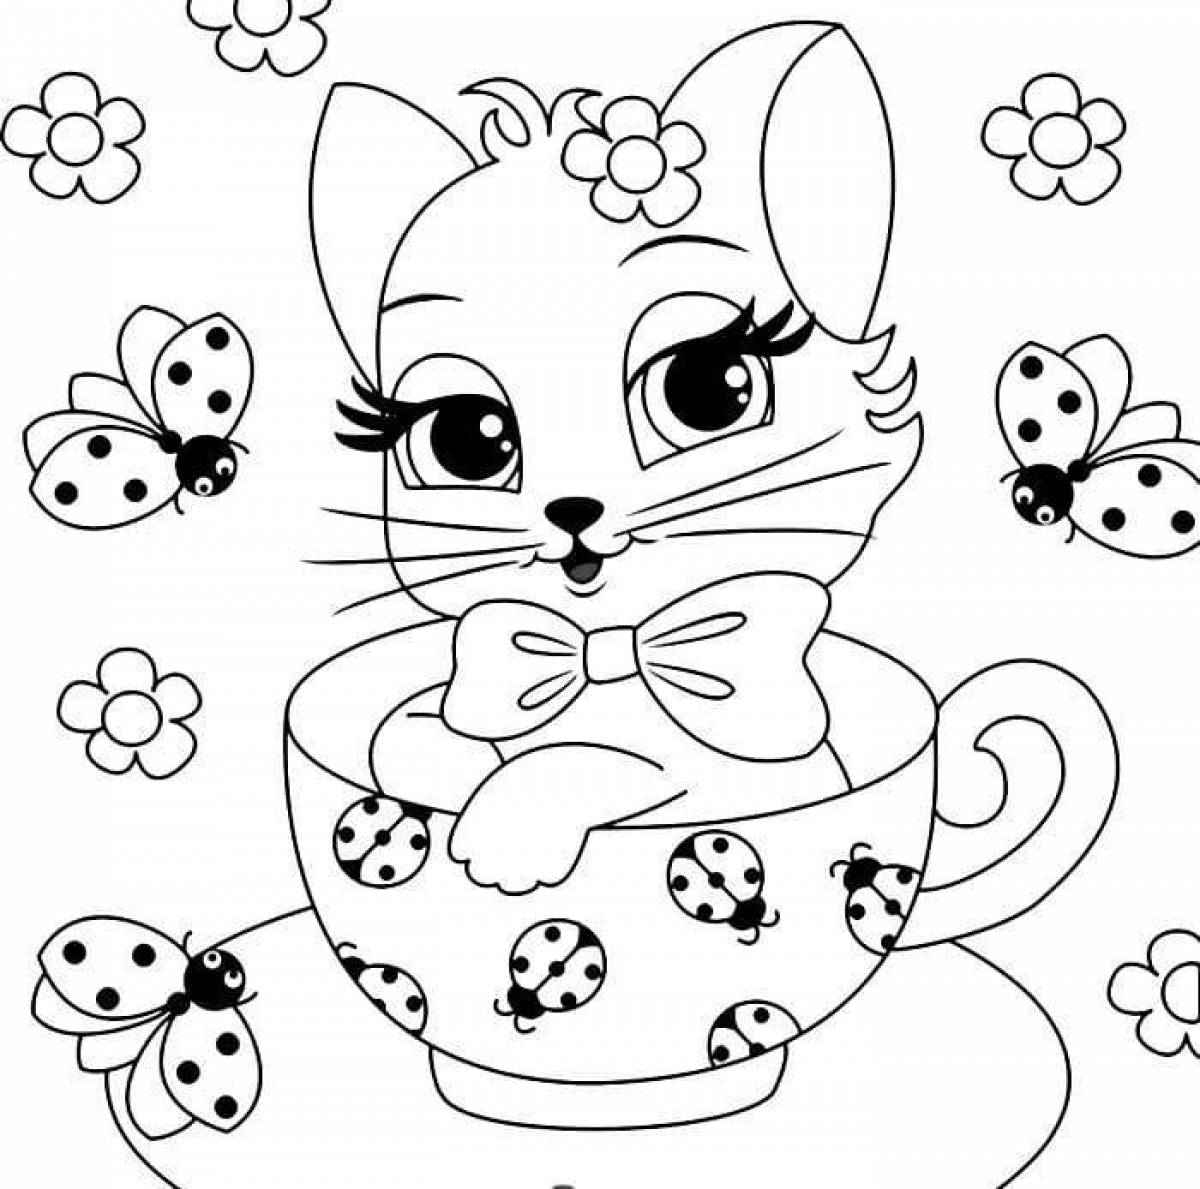 Fluffy coloring cat for children 6-7 years old